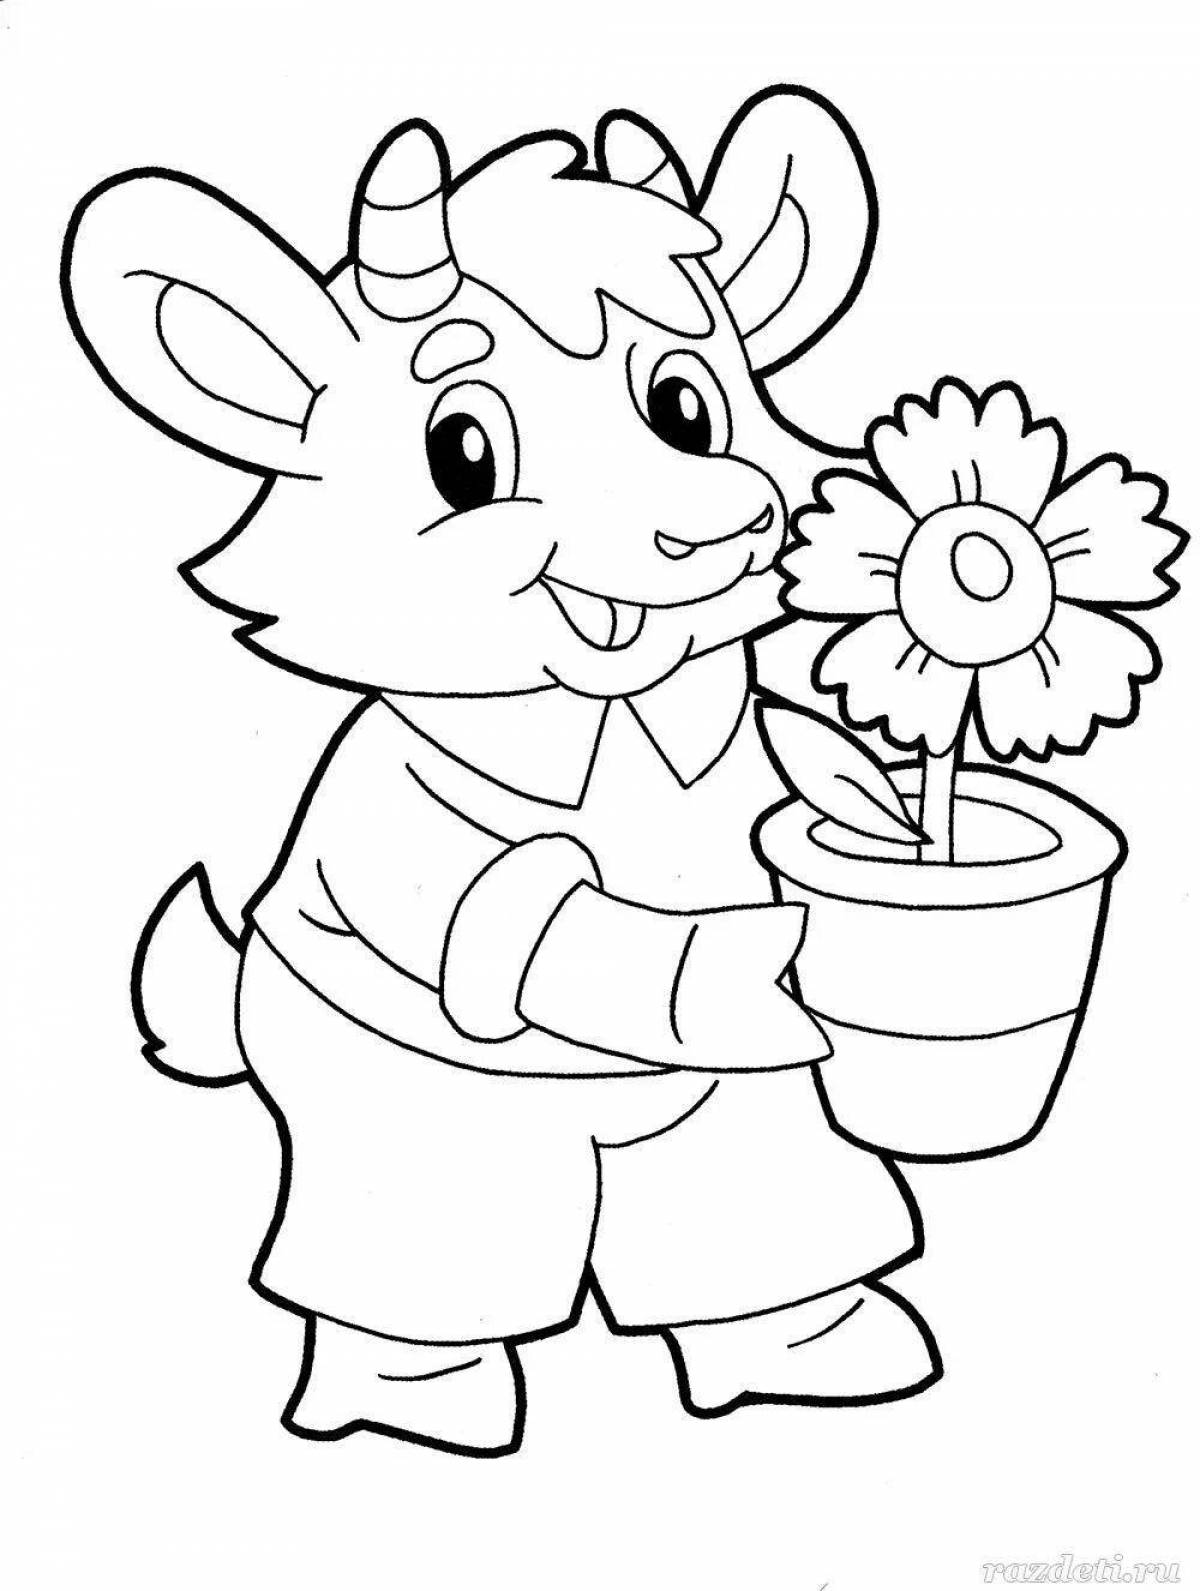 Adorable goat and seven children coloring book